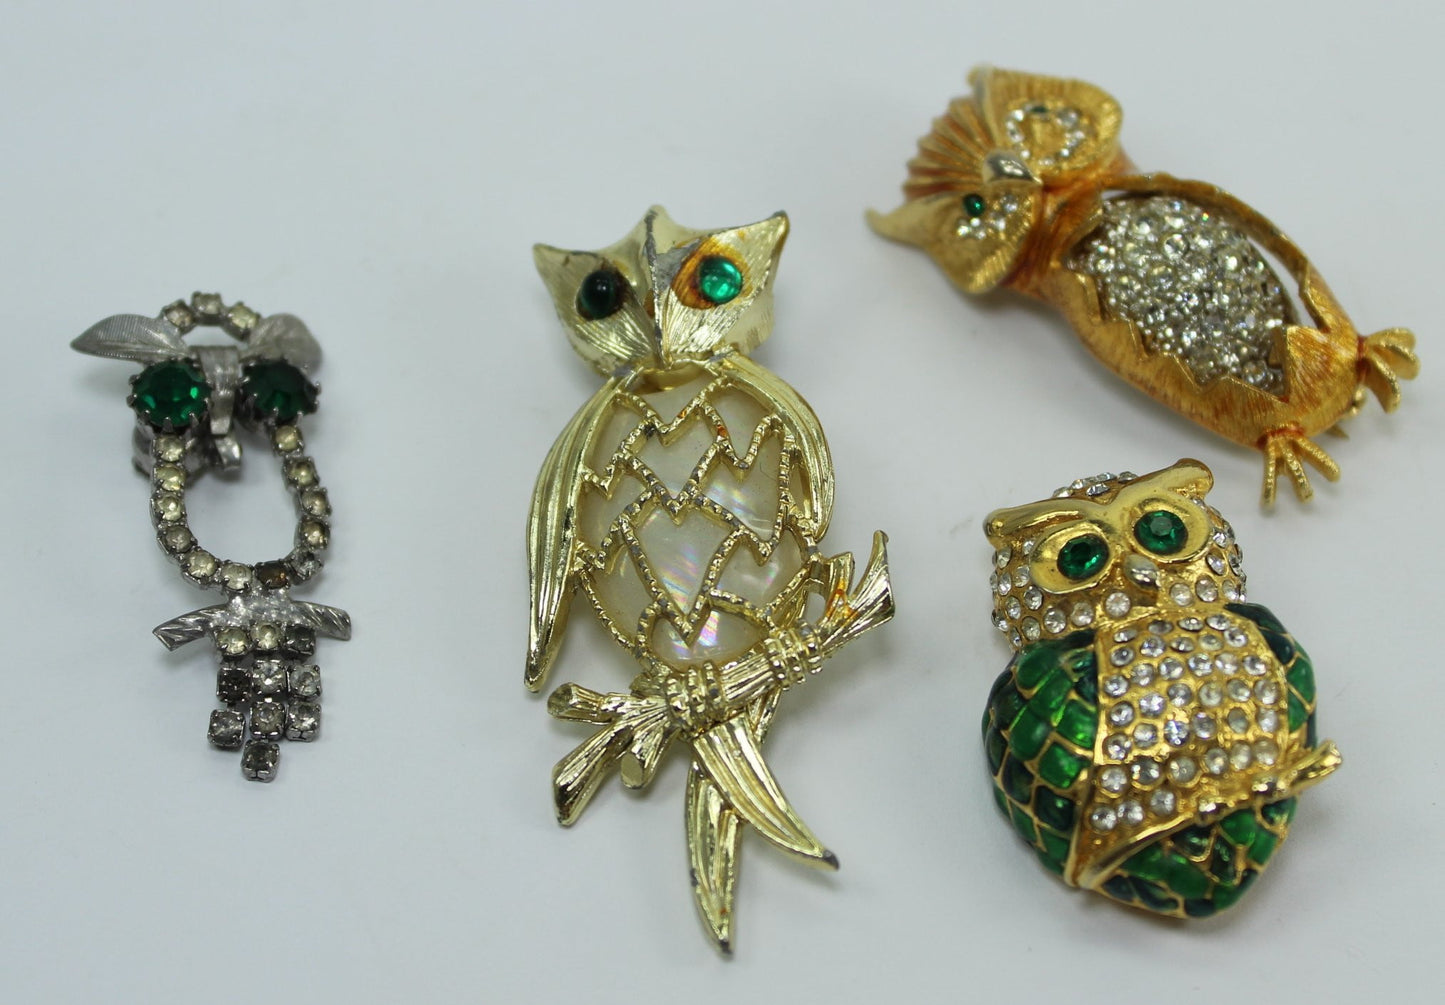 OWLS Jewelry Lot 8 Pieces Necklace Pins Earrings Vintage Crystals Pink Jelly B MOP Wearables green crystals